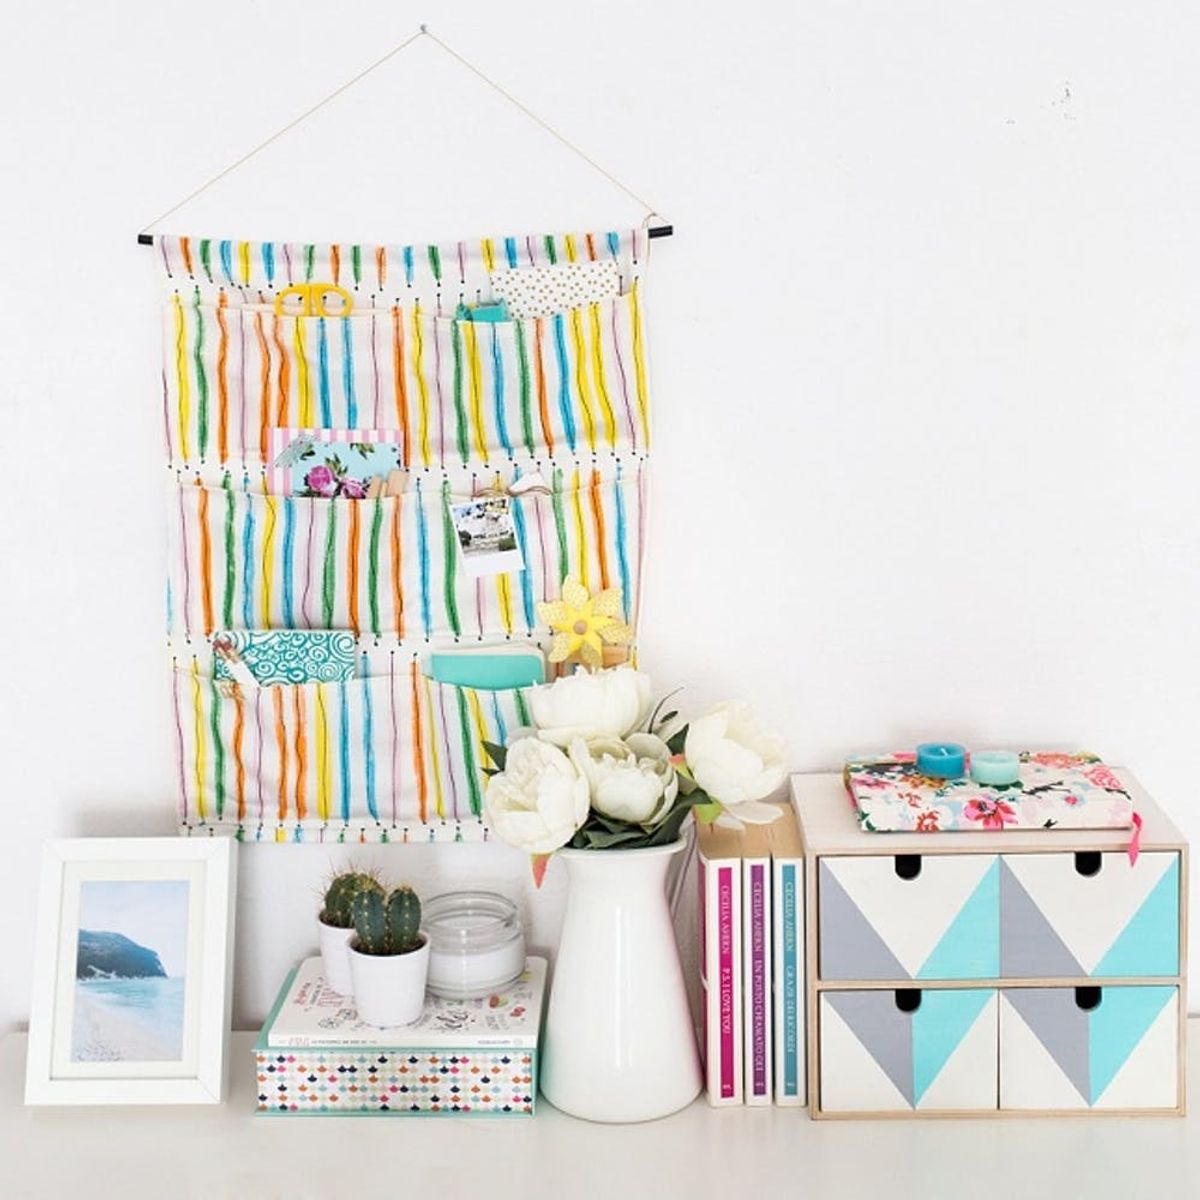 DIY This Hanging Storage Bag and Keep Your Home Office Organized